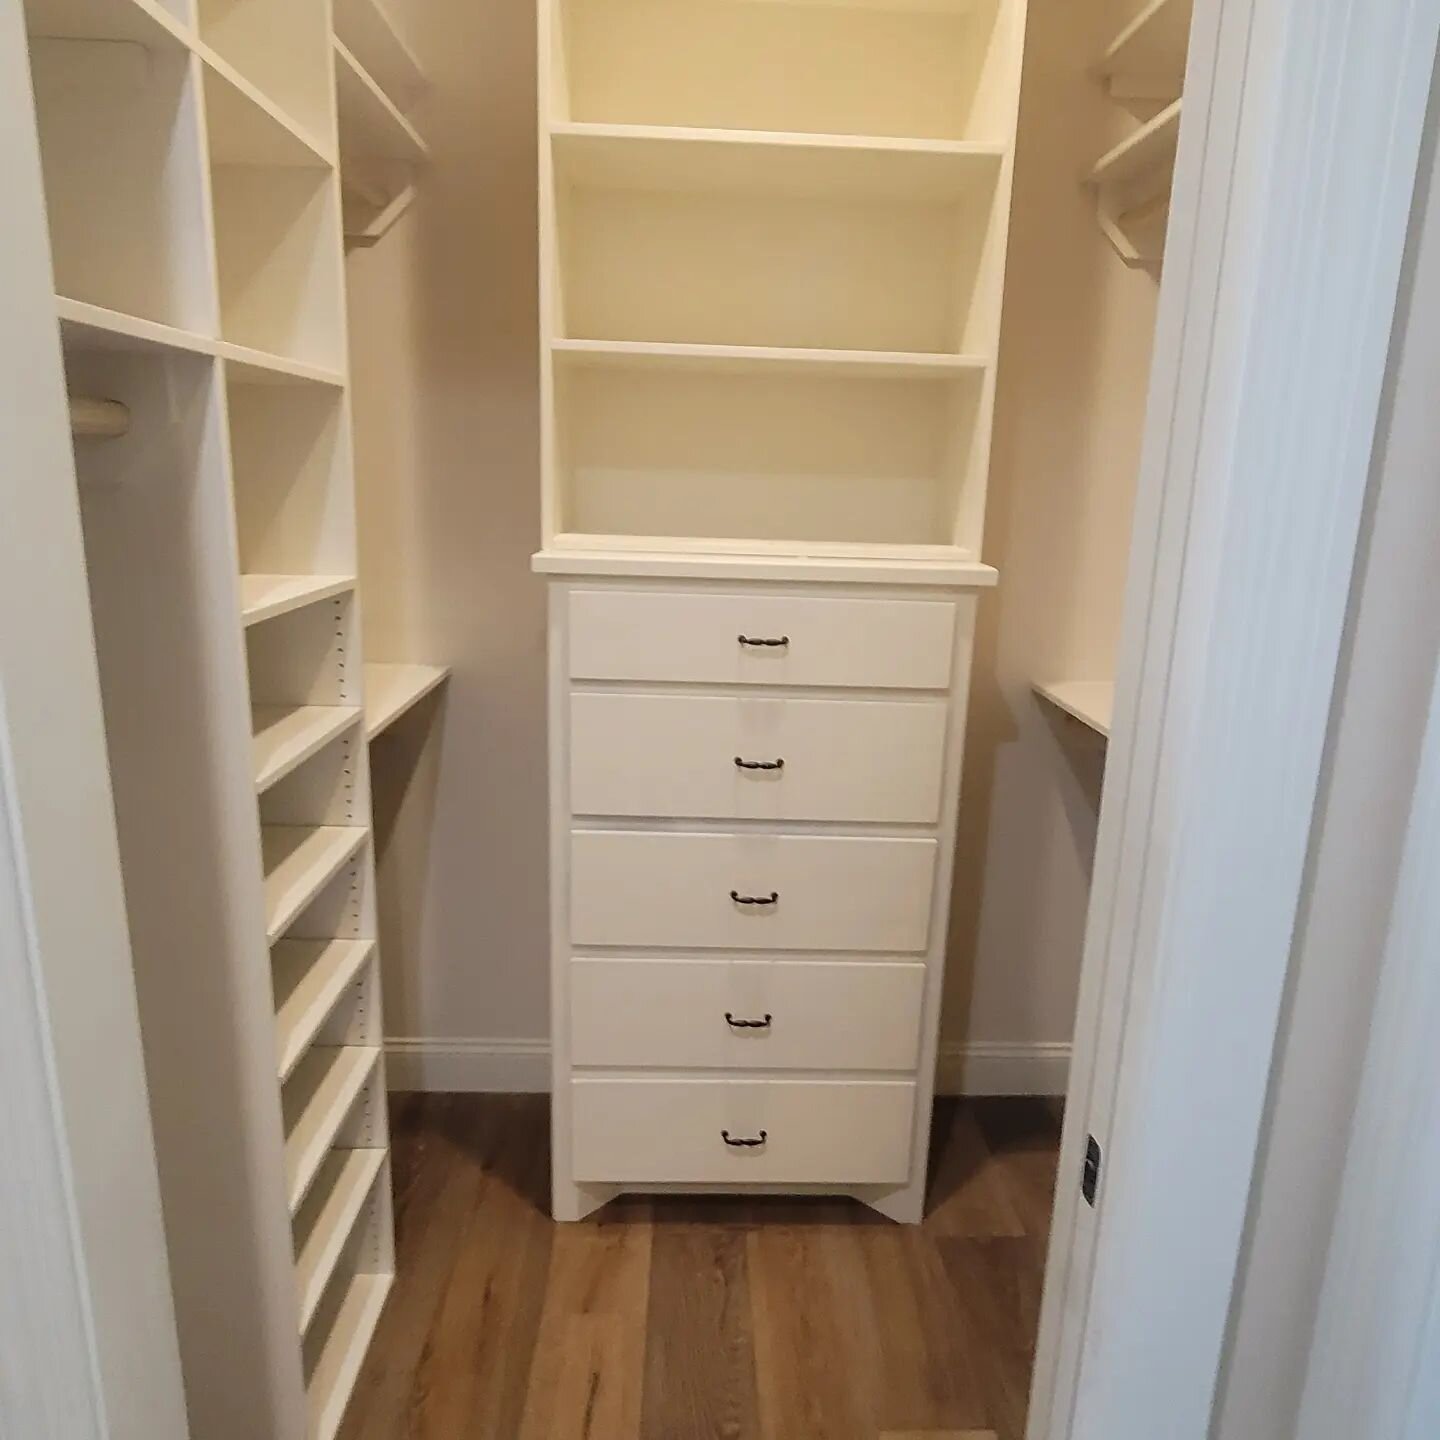 One of this week's projects was 4 walk-in closets, a coat closet, and a linen closet where the plain wood shelves have been painted the color of &quot;Alabaster&quot; Milesi brand semi-gloss sheen. The walls are Shoji White flat sheen. 

Thanks for c